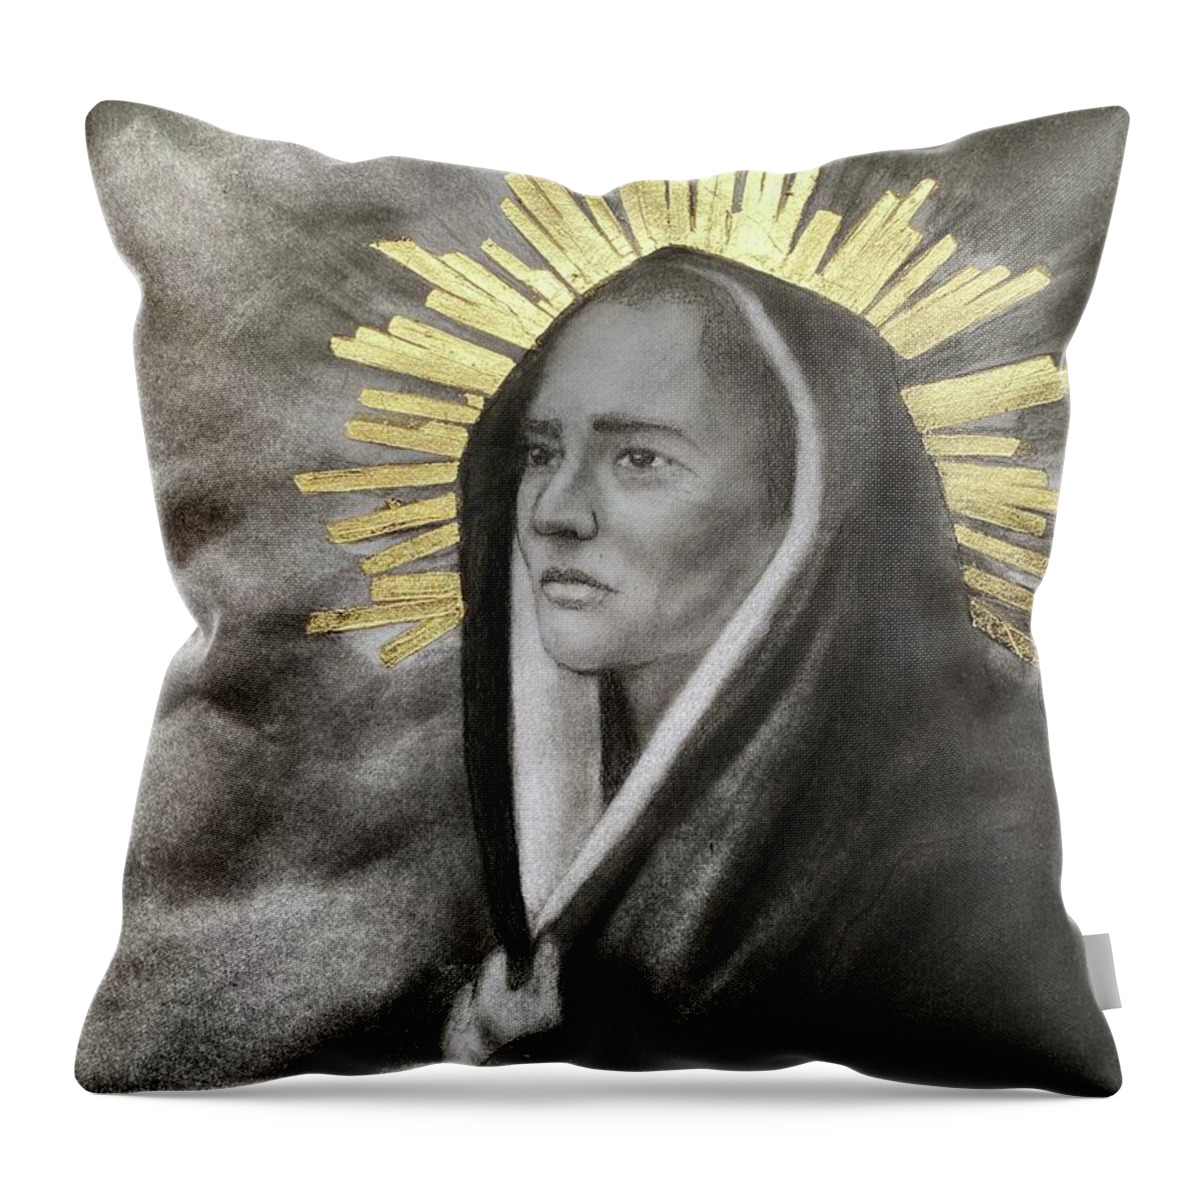 Our Lady Of Sorrows Throw Pillow featuring the drawing Our Lady of Sorrows by Nadija Armusik